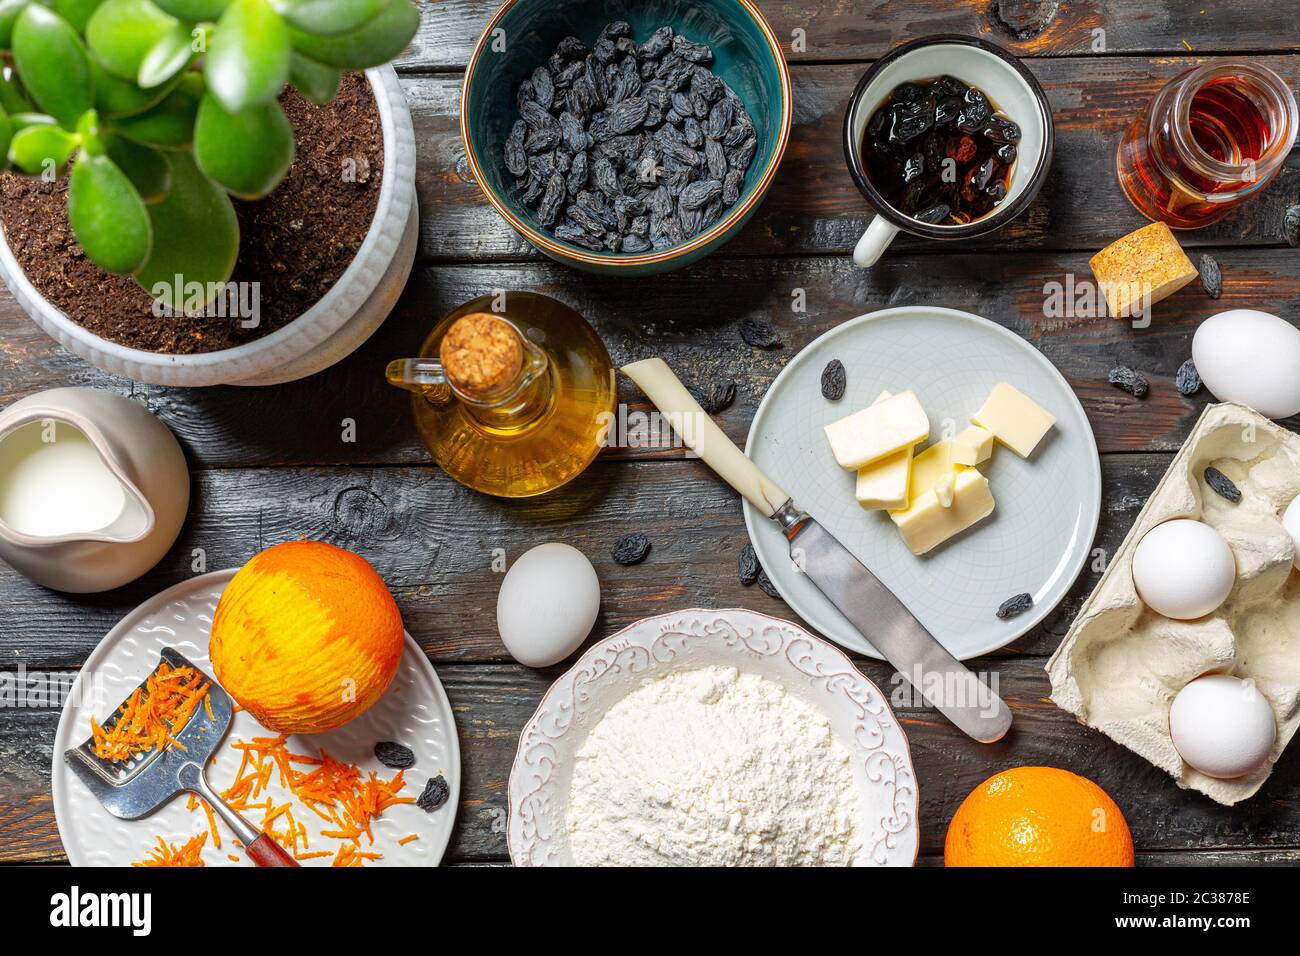 Ingredients for home baking. Stock Photo